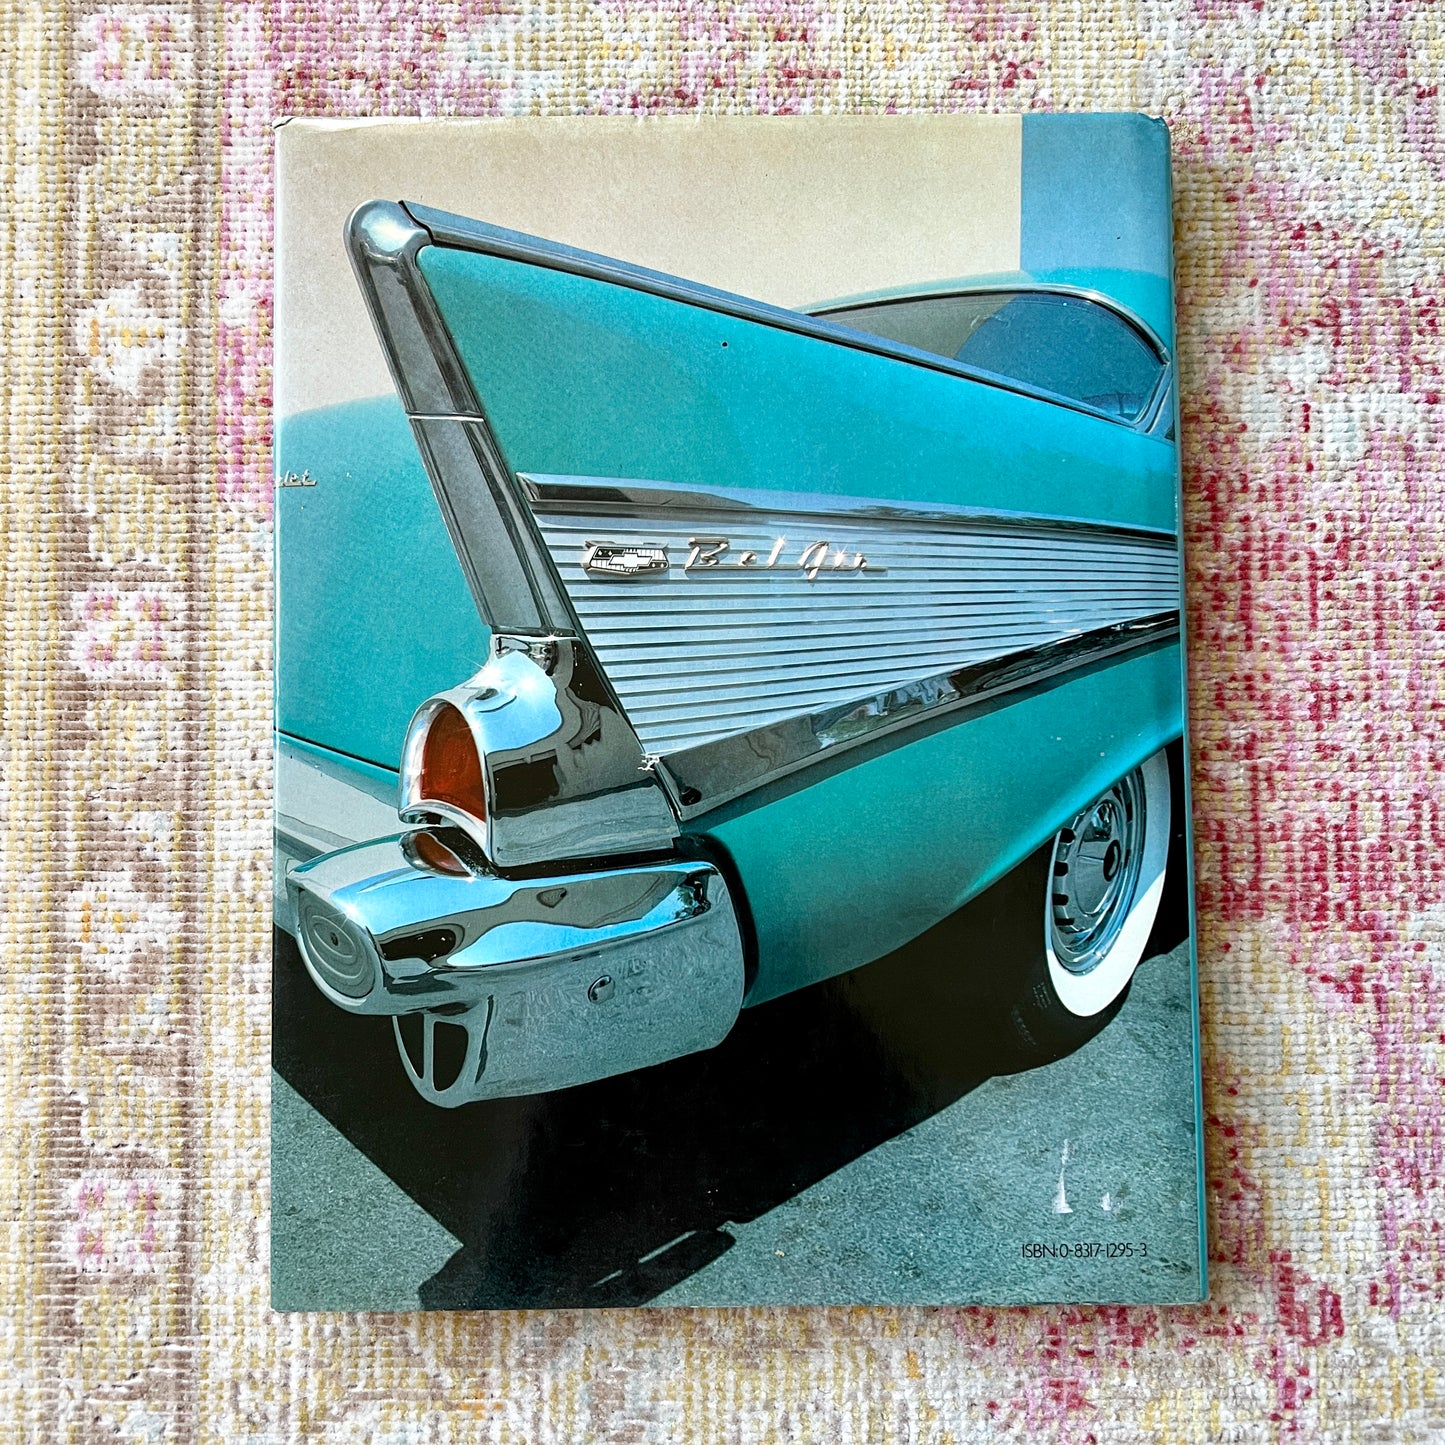 [AS-IS] 1982 "Chrome: Glamour Cars of the Fifties" Coffee Table Book